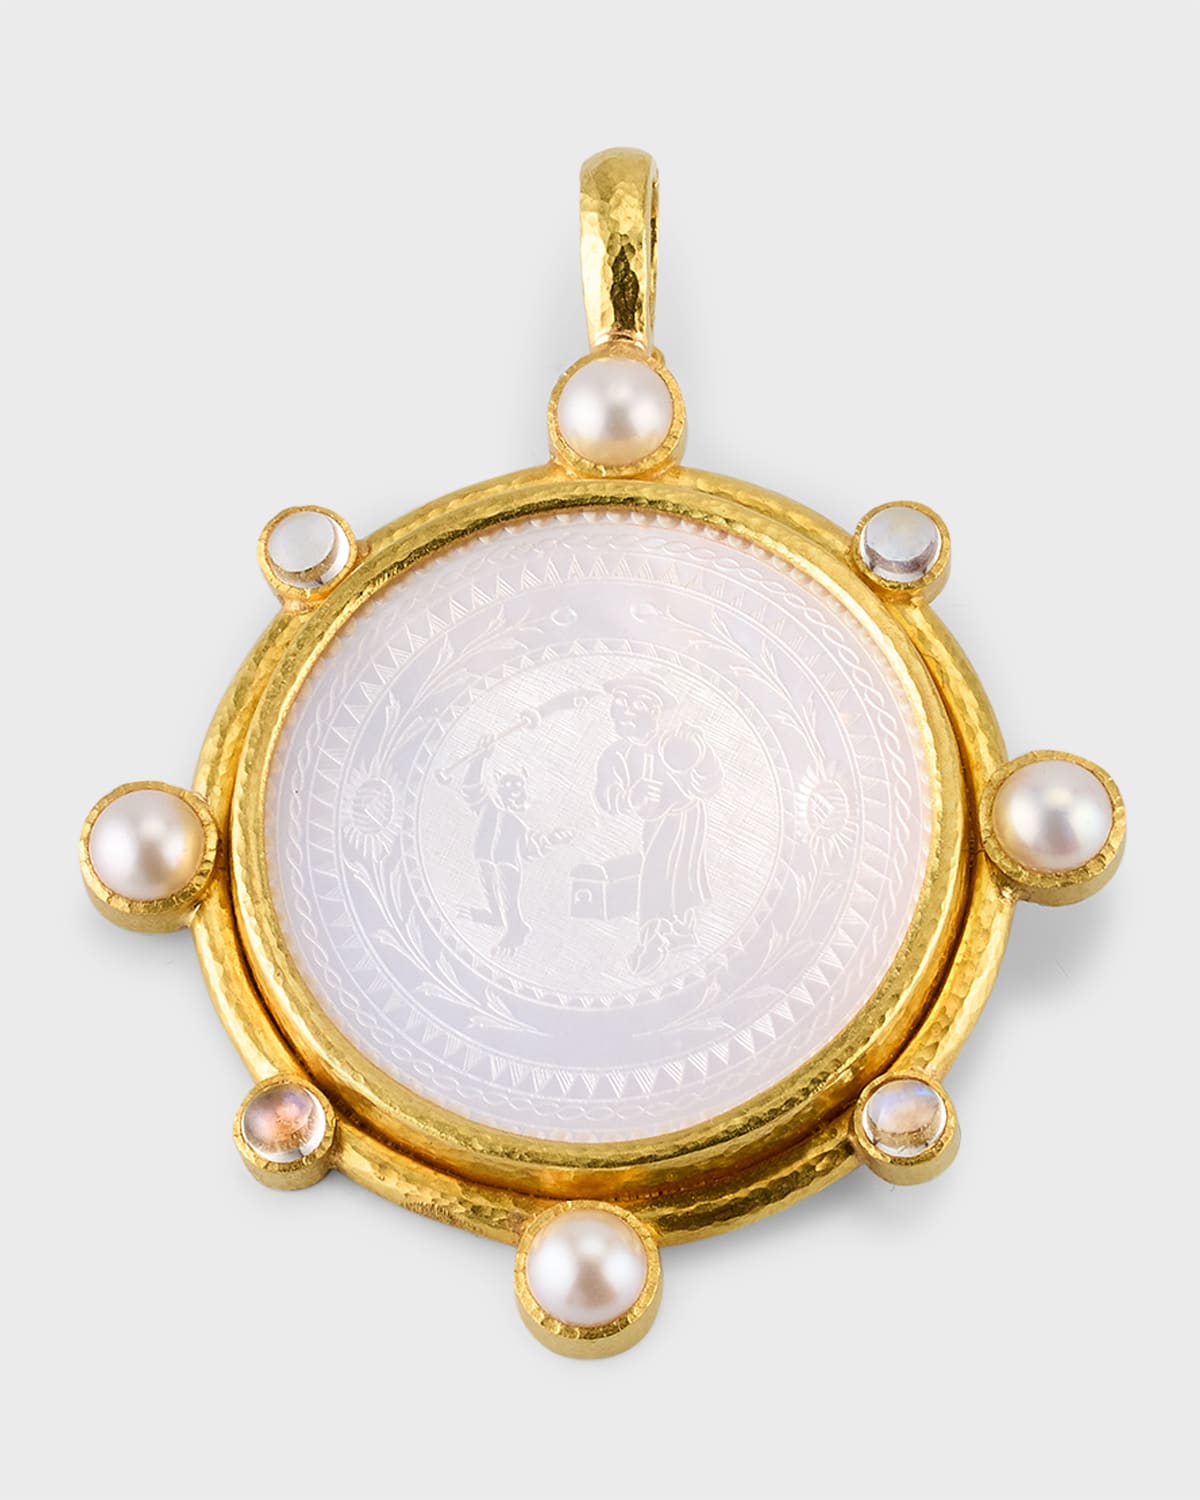 18th Century 35mm Gambling Counter Pendant with Pearls and Moonstone